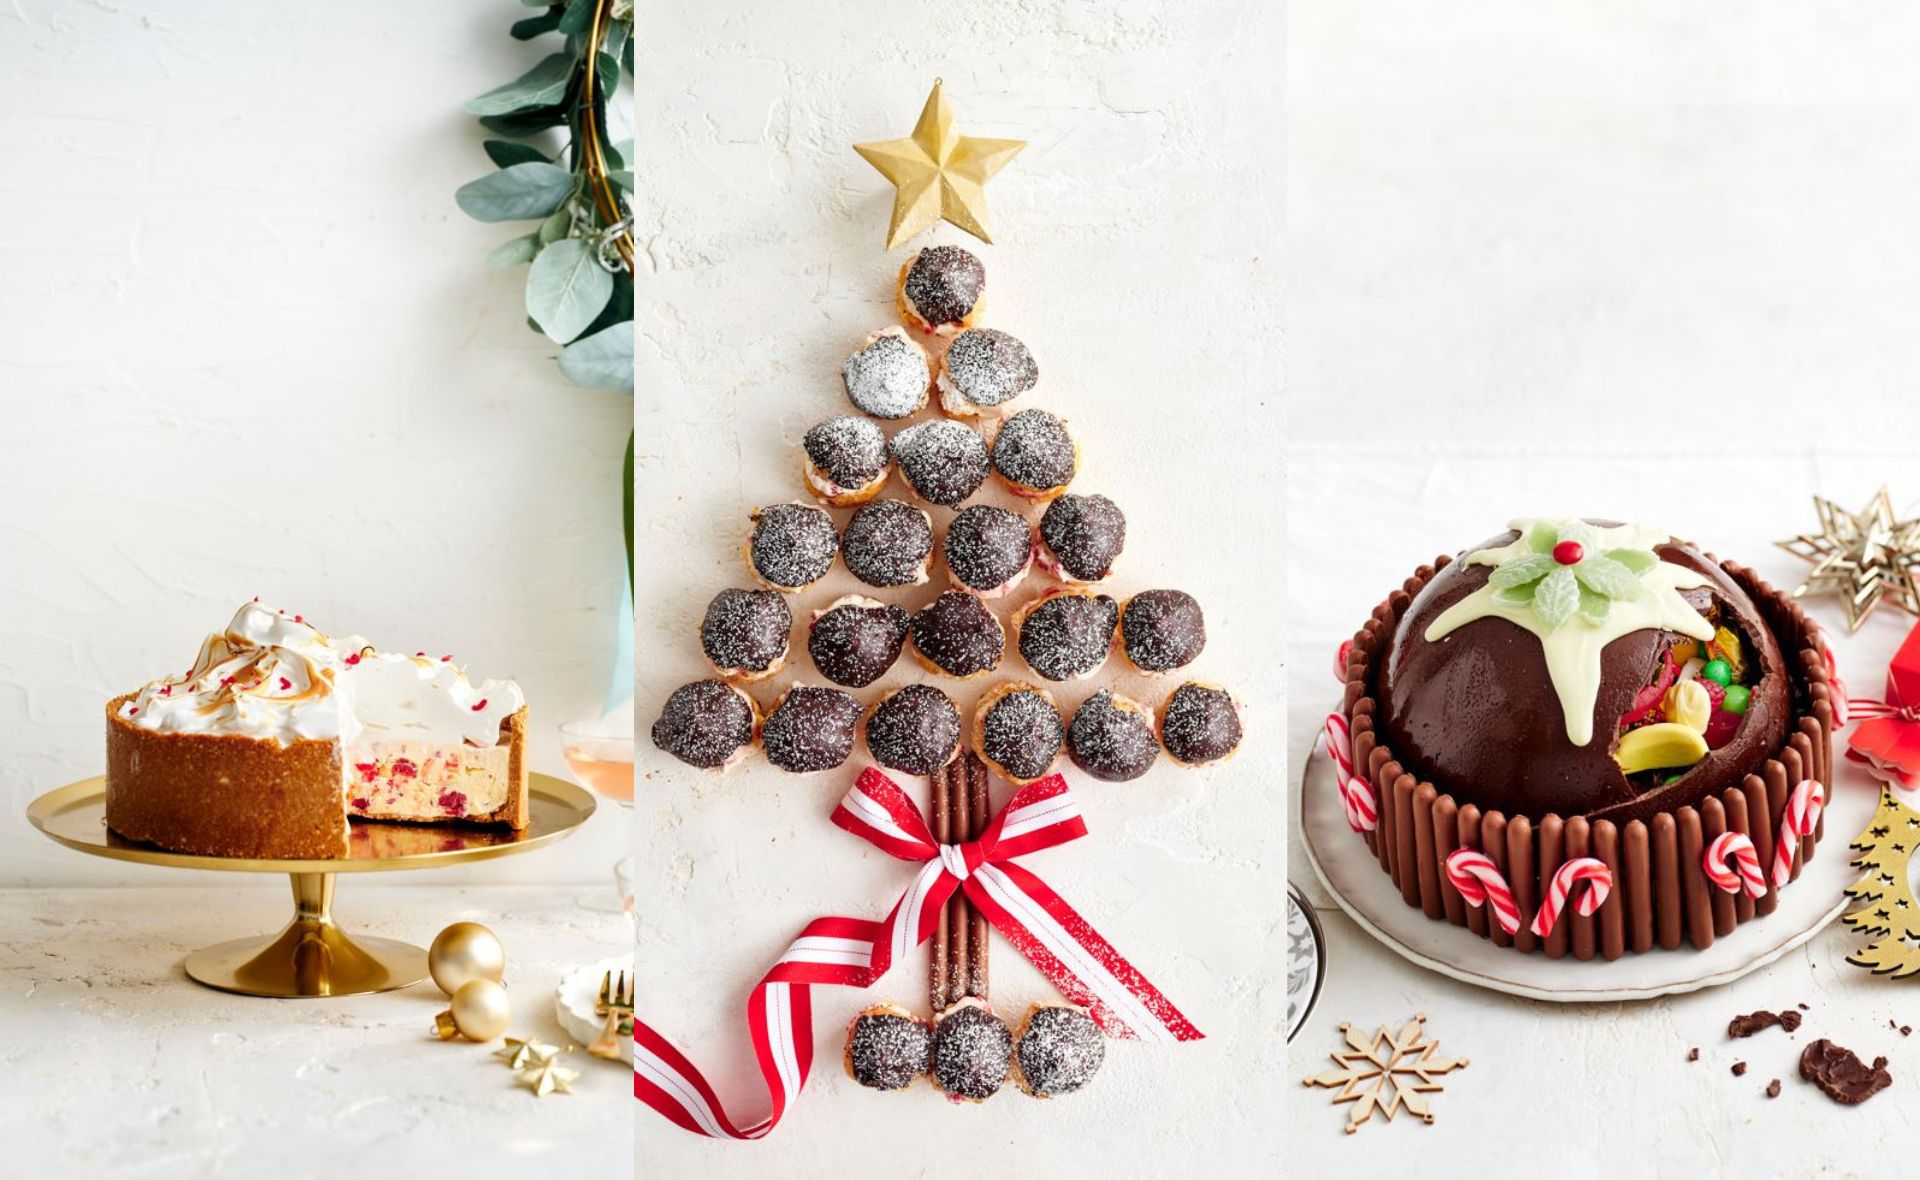 Showstopping Christmas dessert recipes